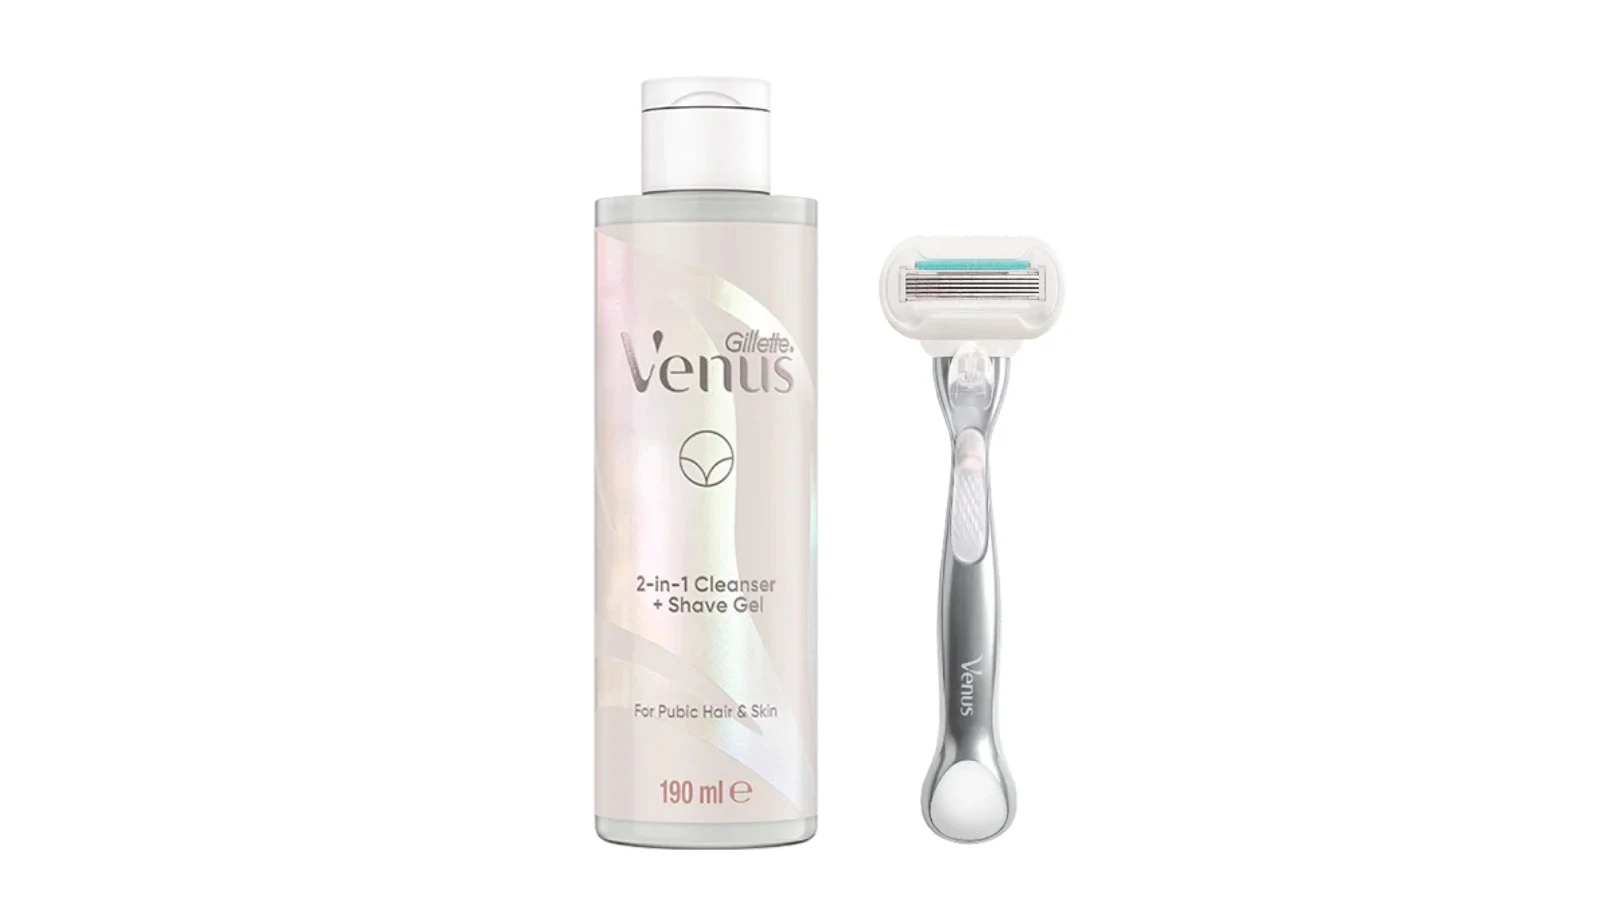 Venus 2 in 1 Cleanser and Shave Gel with Deluxe Smooth razor